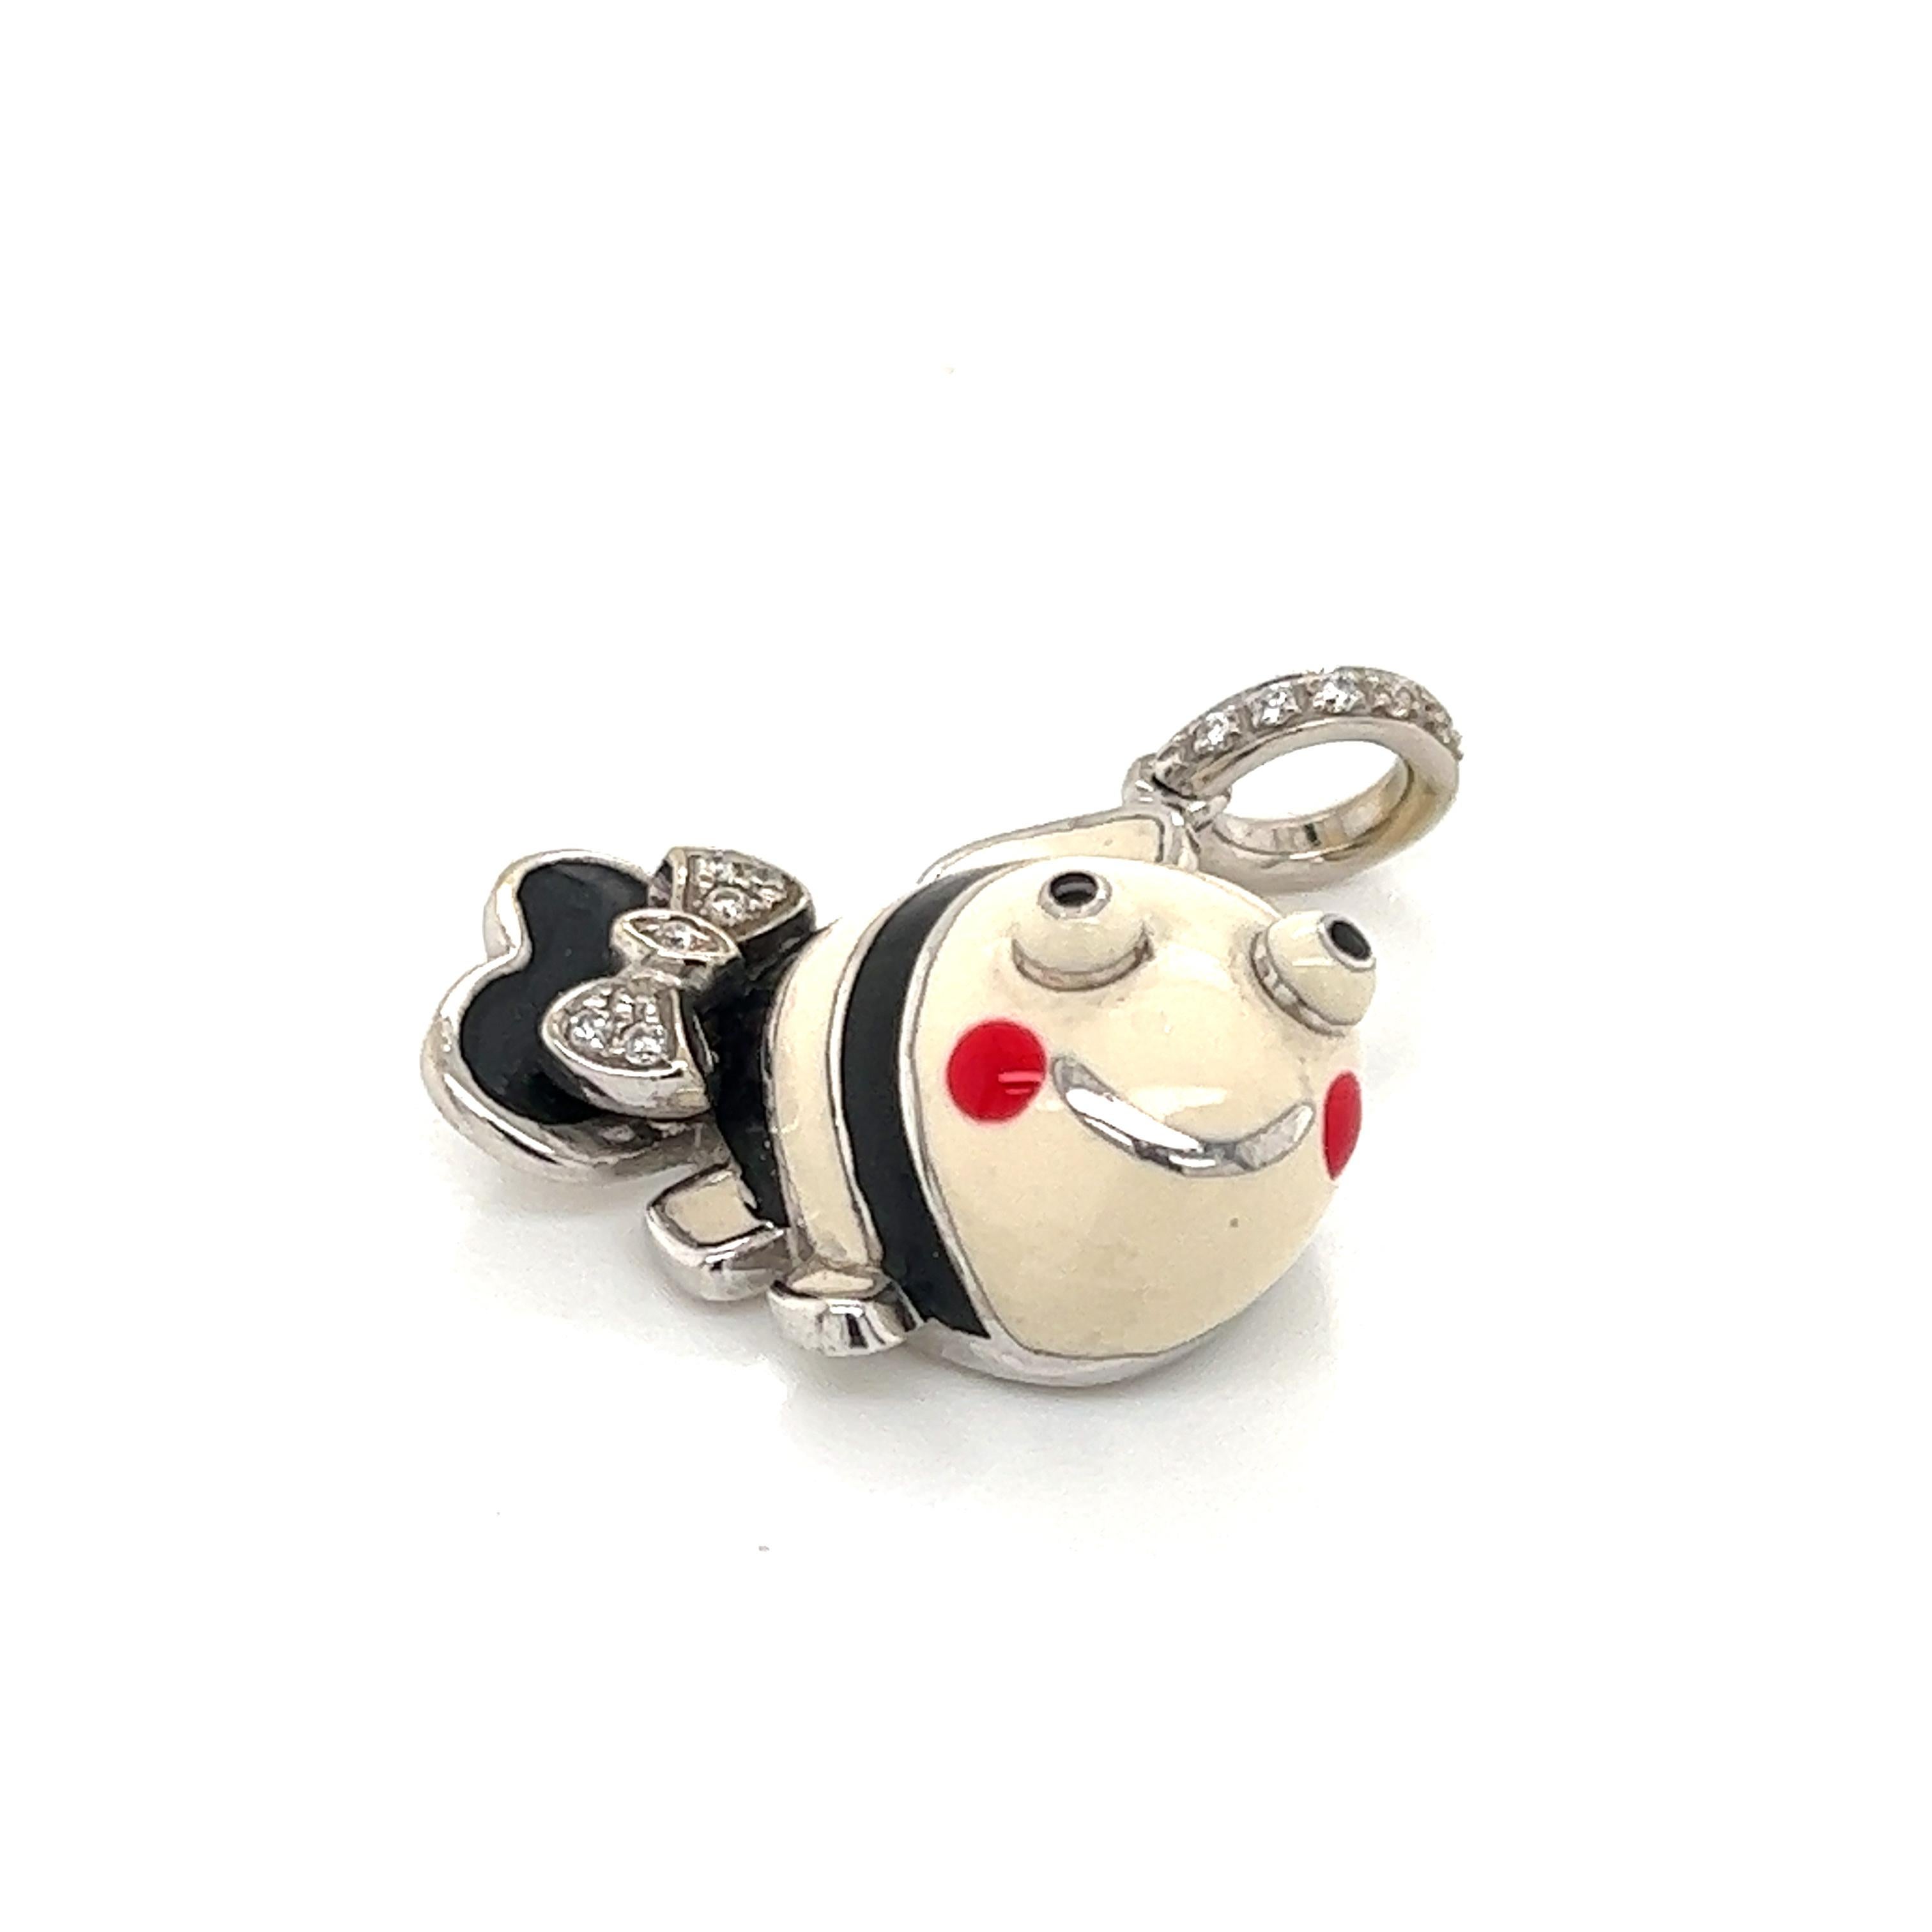 This classic adorable authentic charm or pendant is by Aaron Basha, it is crafted from 18k white gold featuring a cute clown fish with white enamel body and black enamel stripes on the body and tail. Red enamel spots on its face with a white gold